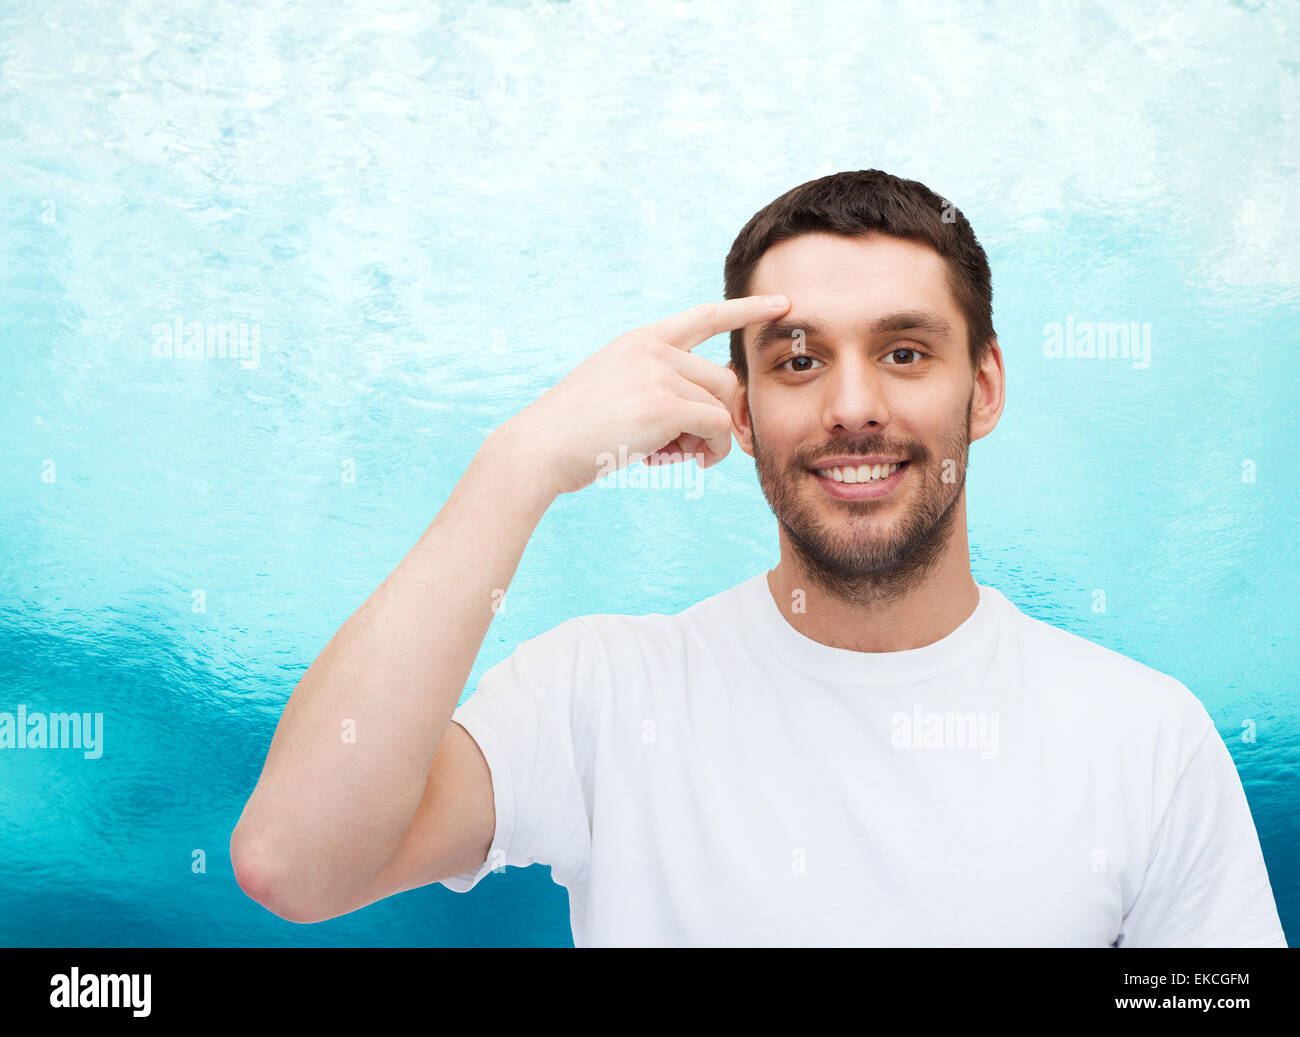 smiling young handsome man pointing to forehead Stock Photo